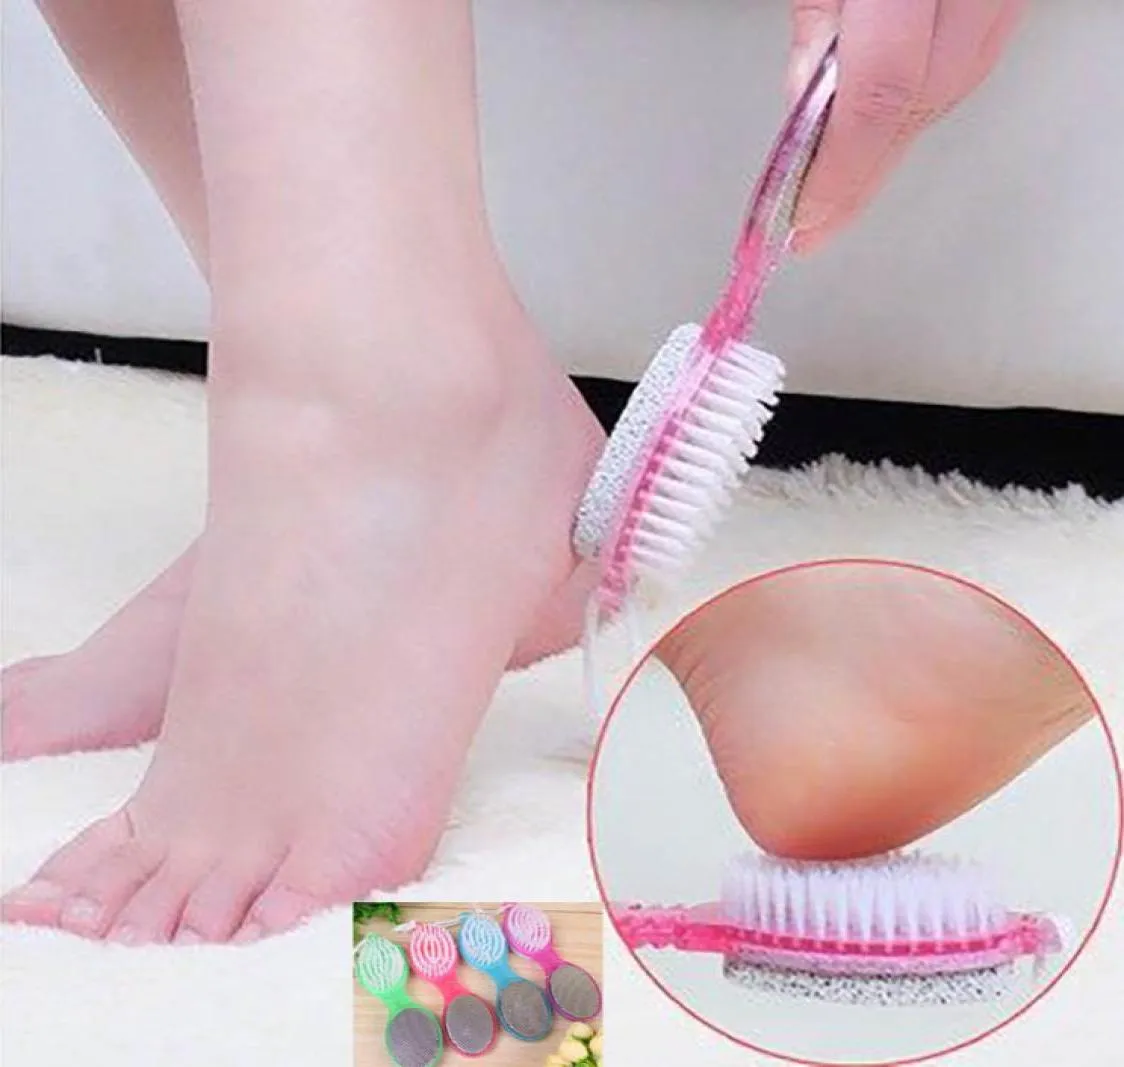 4in1 Clean Feet Brush Foot Pedicure Feet Rasp Brush Nail Clippers Feet Care Dry Smooth Skin Pumice Stone Board Remove dead skin HH3402071